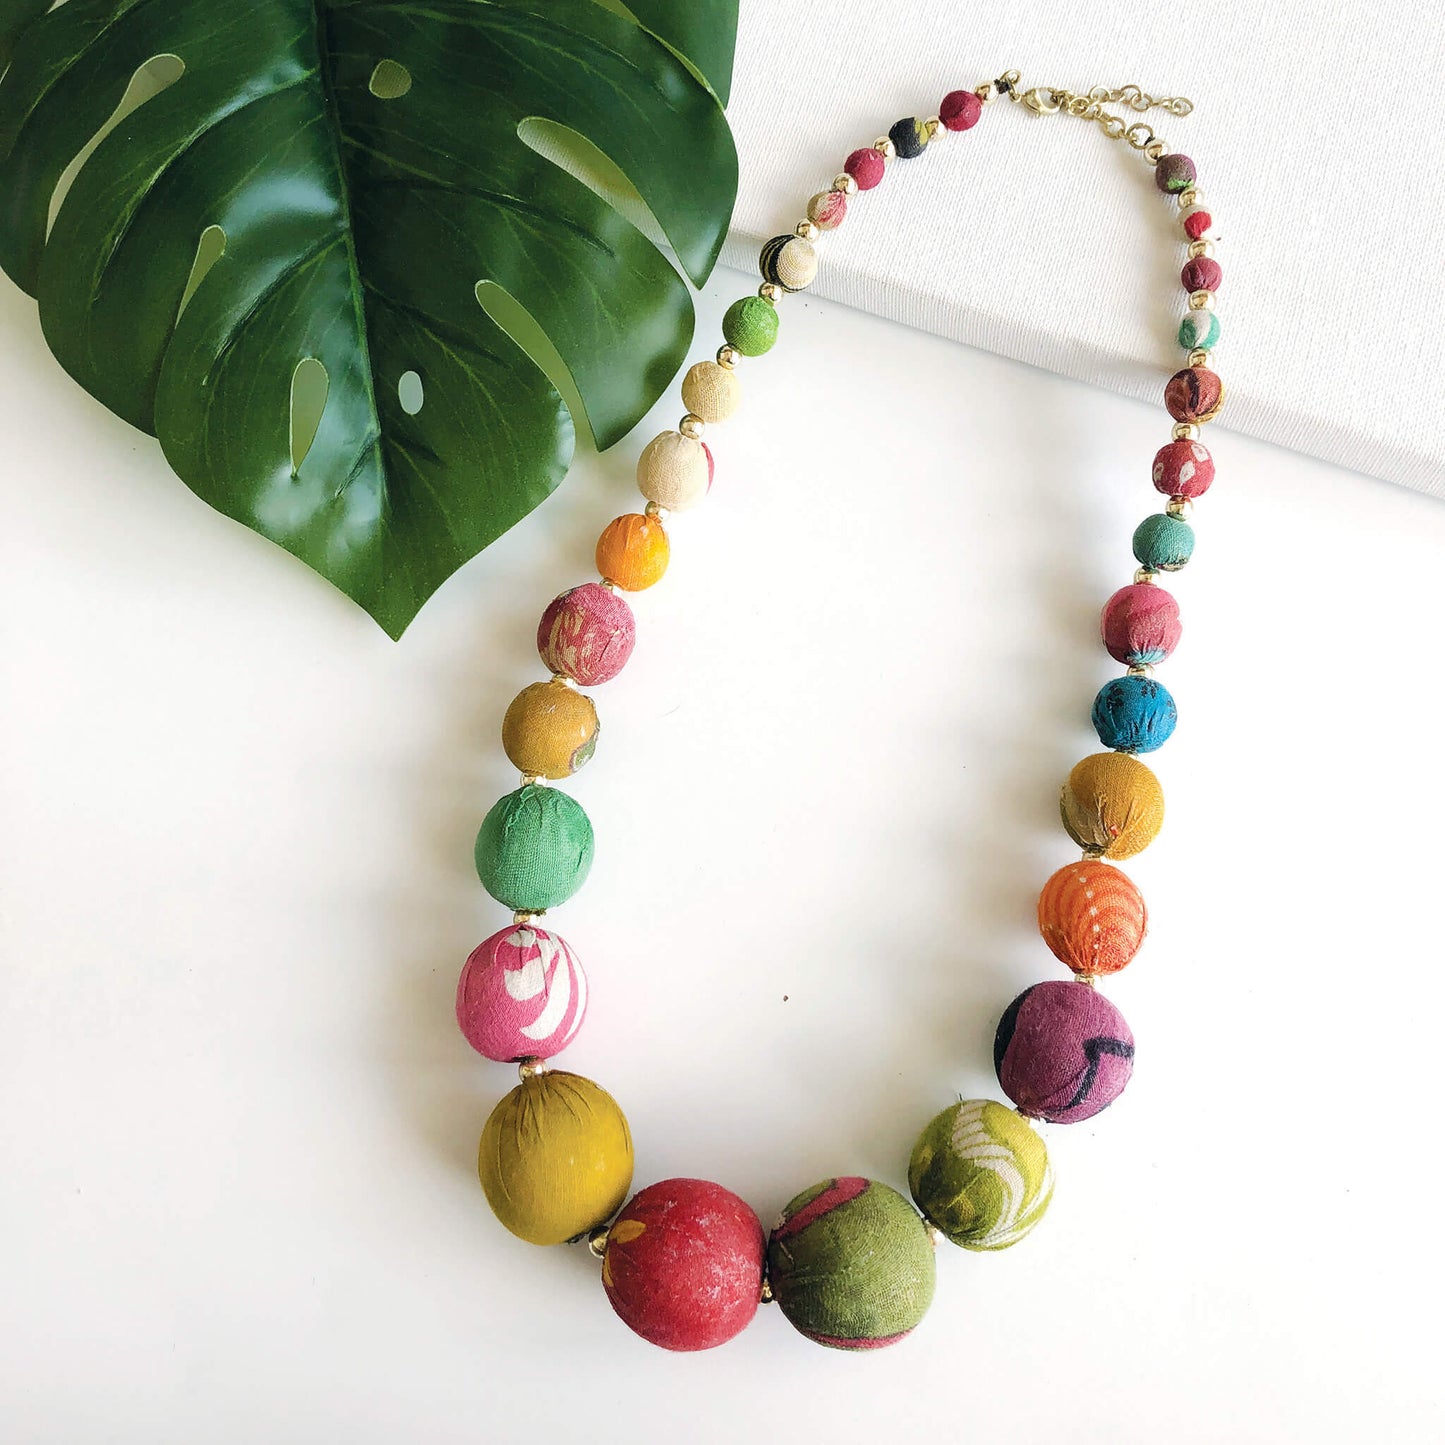 A multicolor strand of textile-wrapped beads forms this necklace.